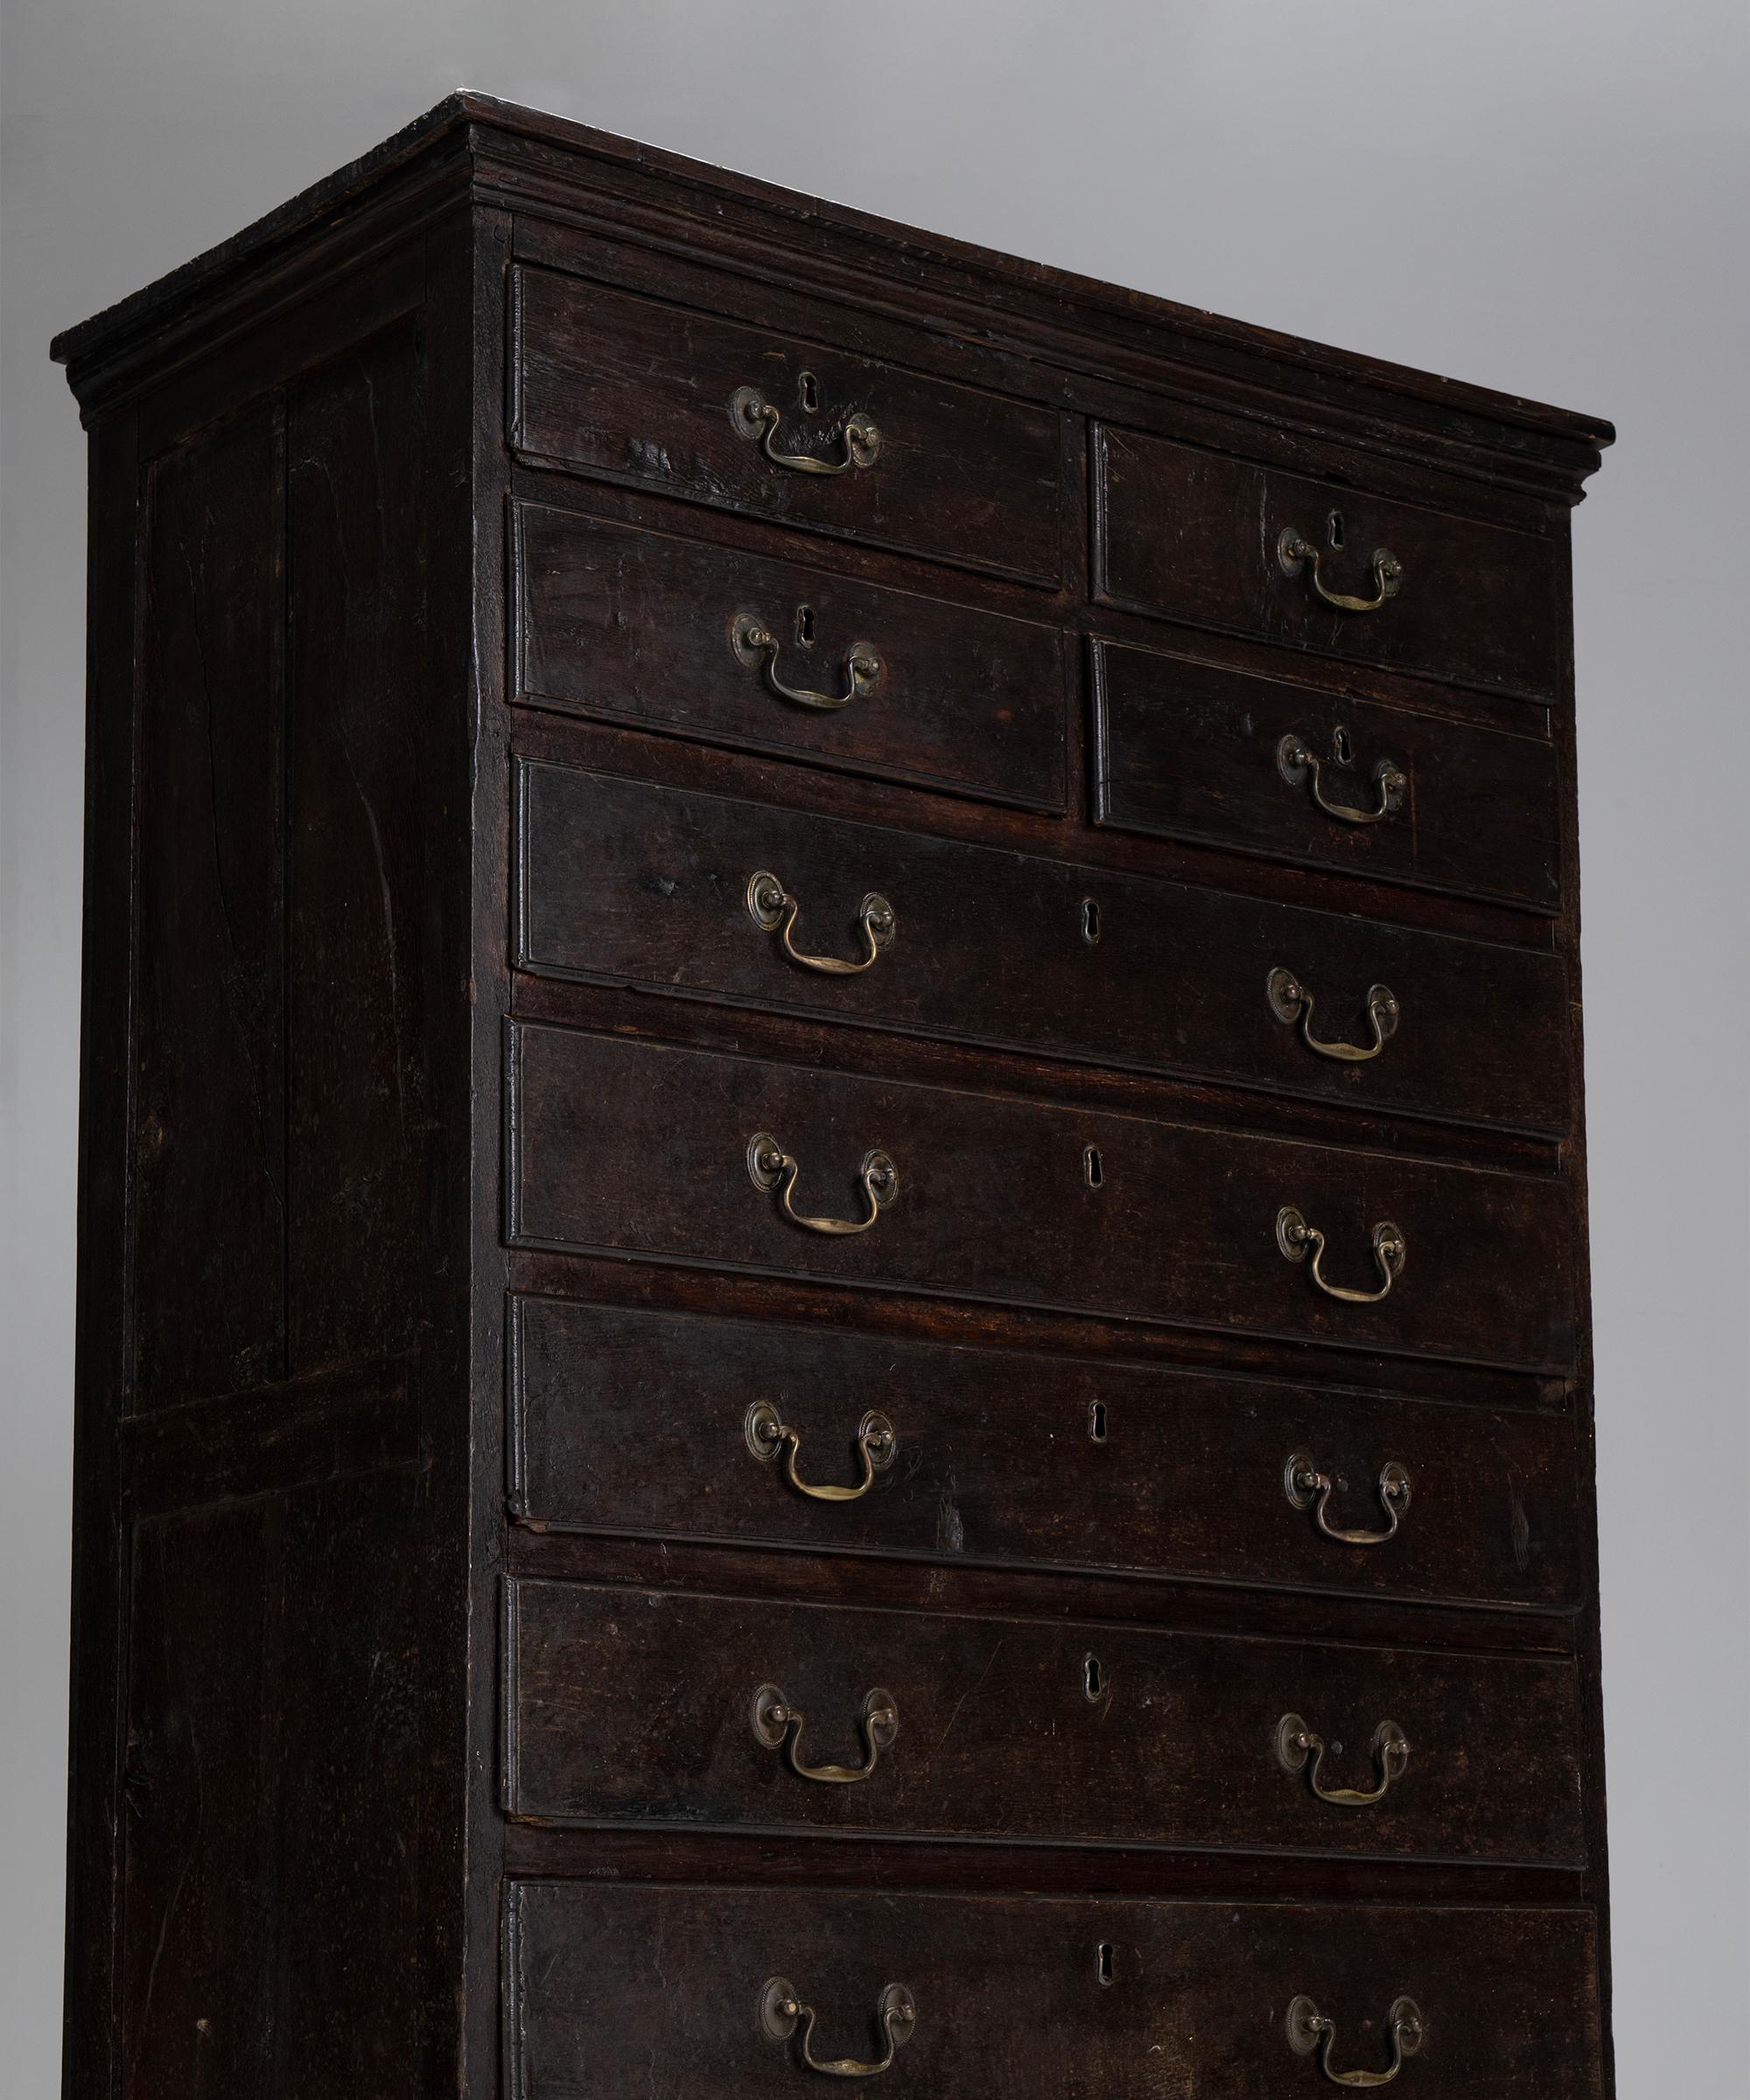 Oak & pine tallboy

England Circa 1780

Elegant bank of drawers with exceptional patina and original brass pulls.

Measures: 39.5”w x 17.5”d x 79.5”h.